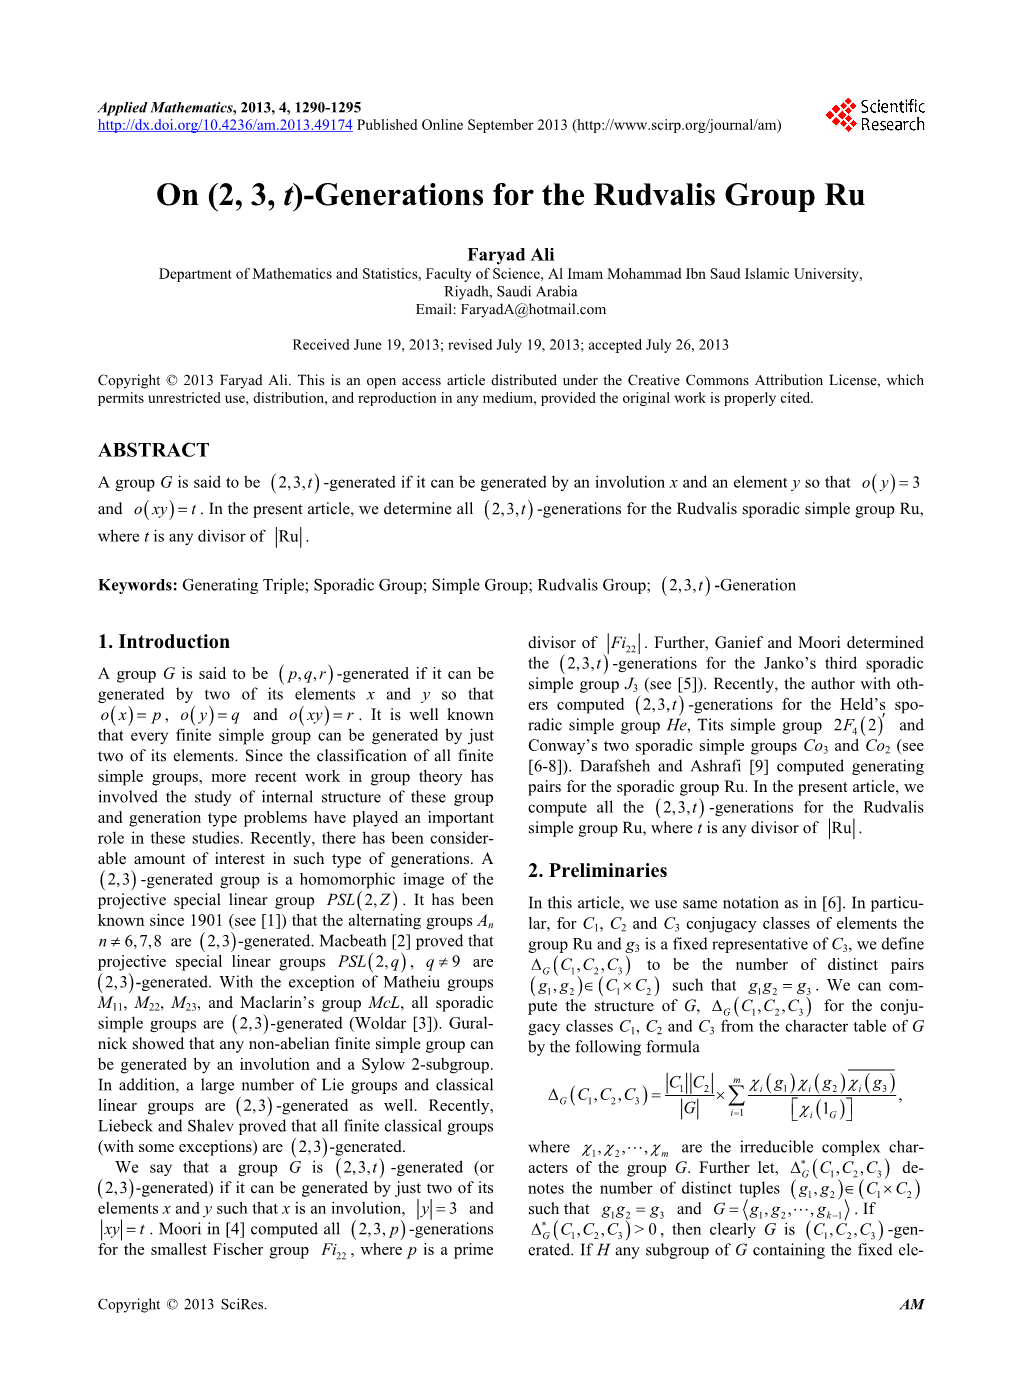 Generations for the Rudvalis Group Ru